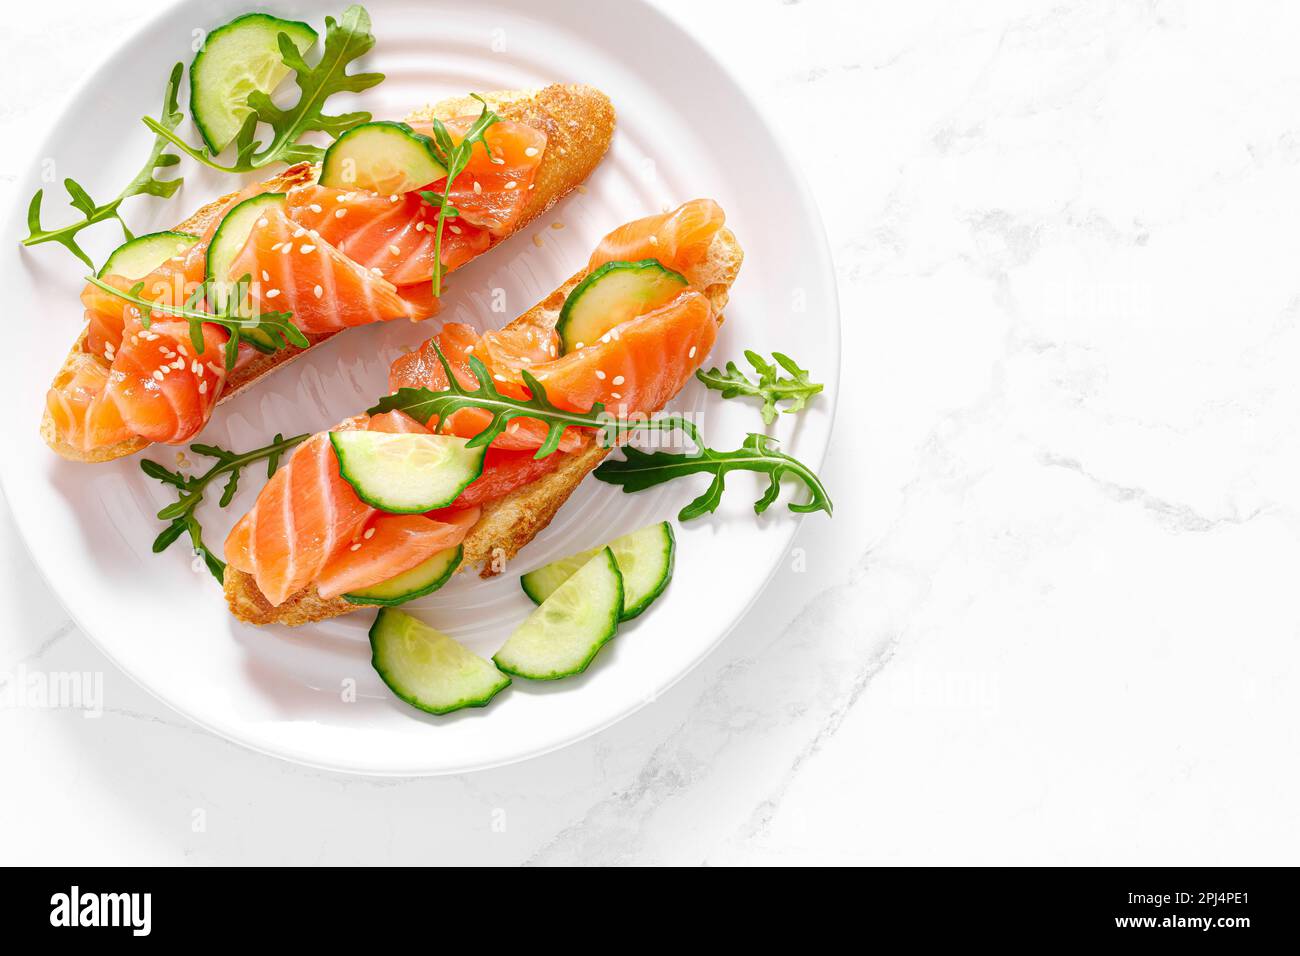 Sandwiches with salted salmon. Healthy food, breakfast. Top view Stock Photo